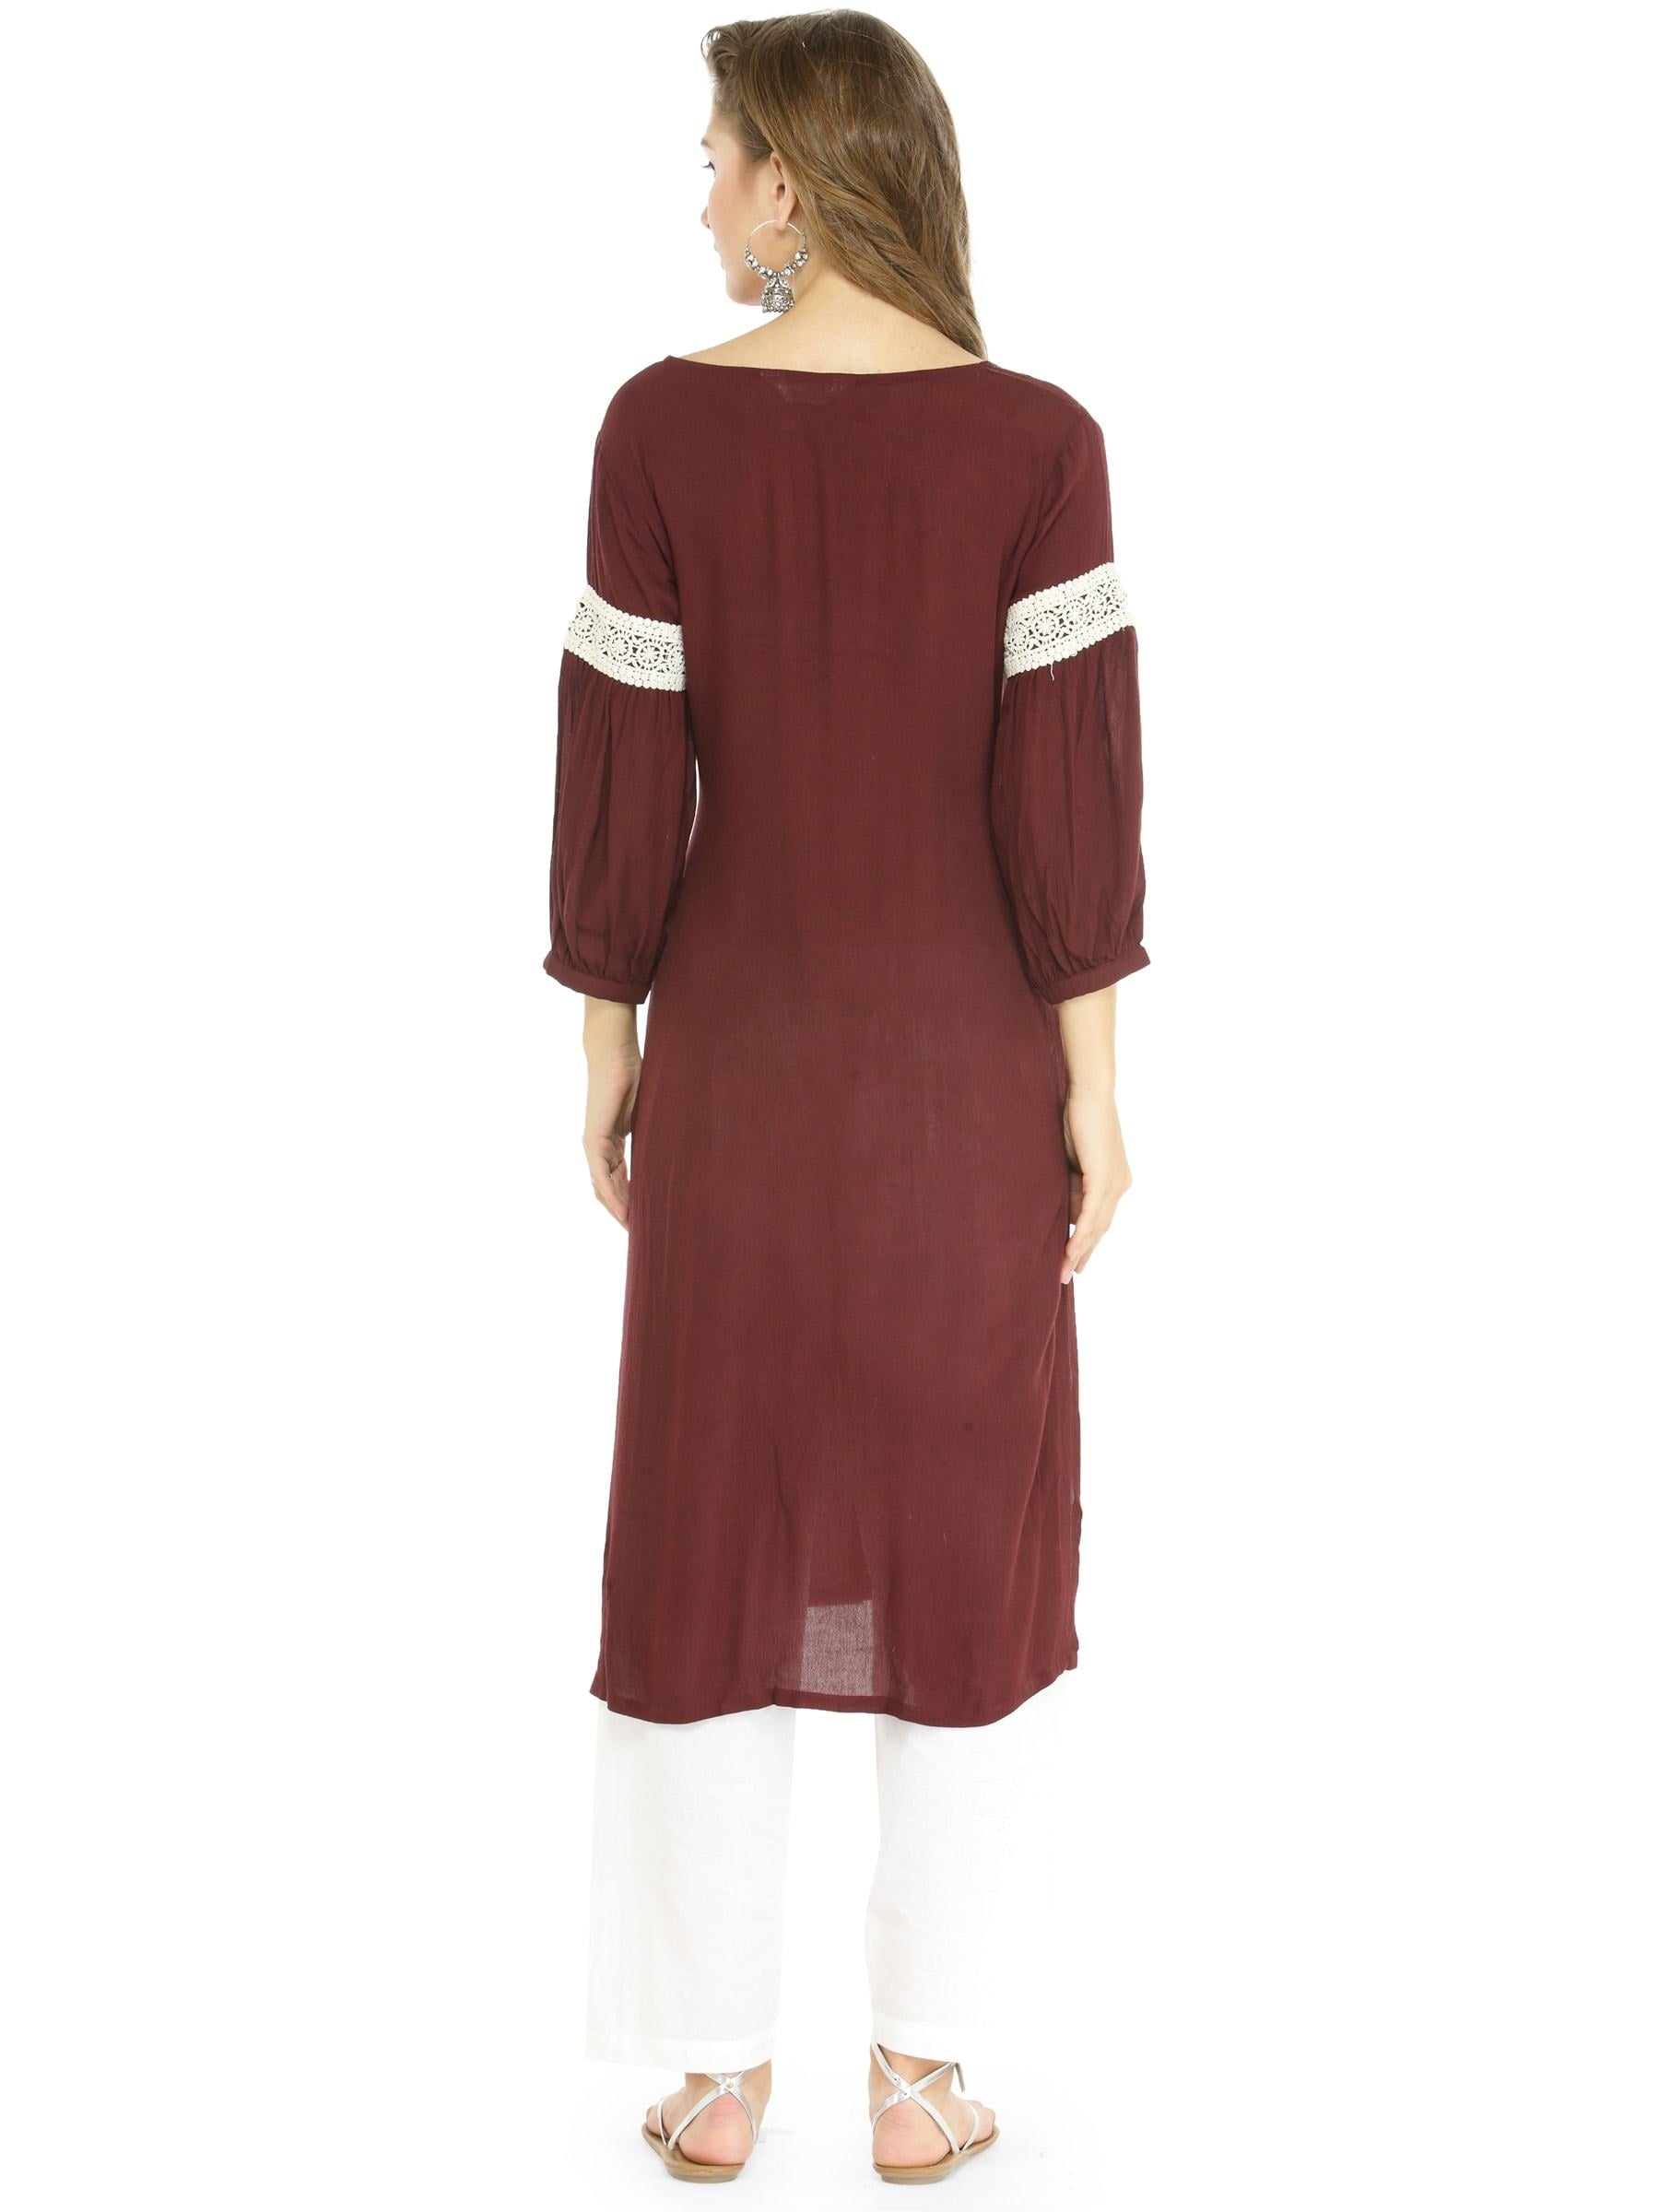 Women's Solid Shirt Kurta With Cold-Shoulder - Pannkh